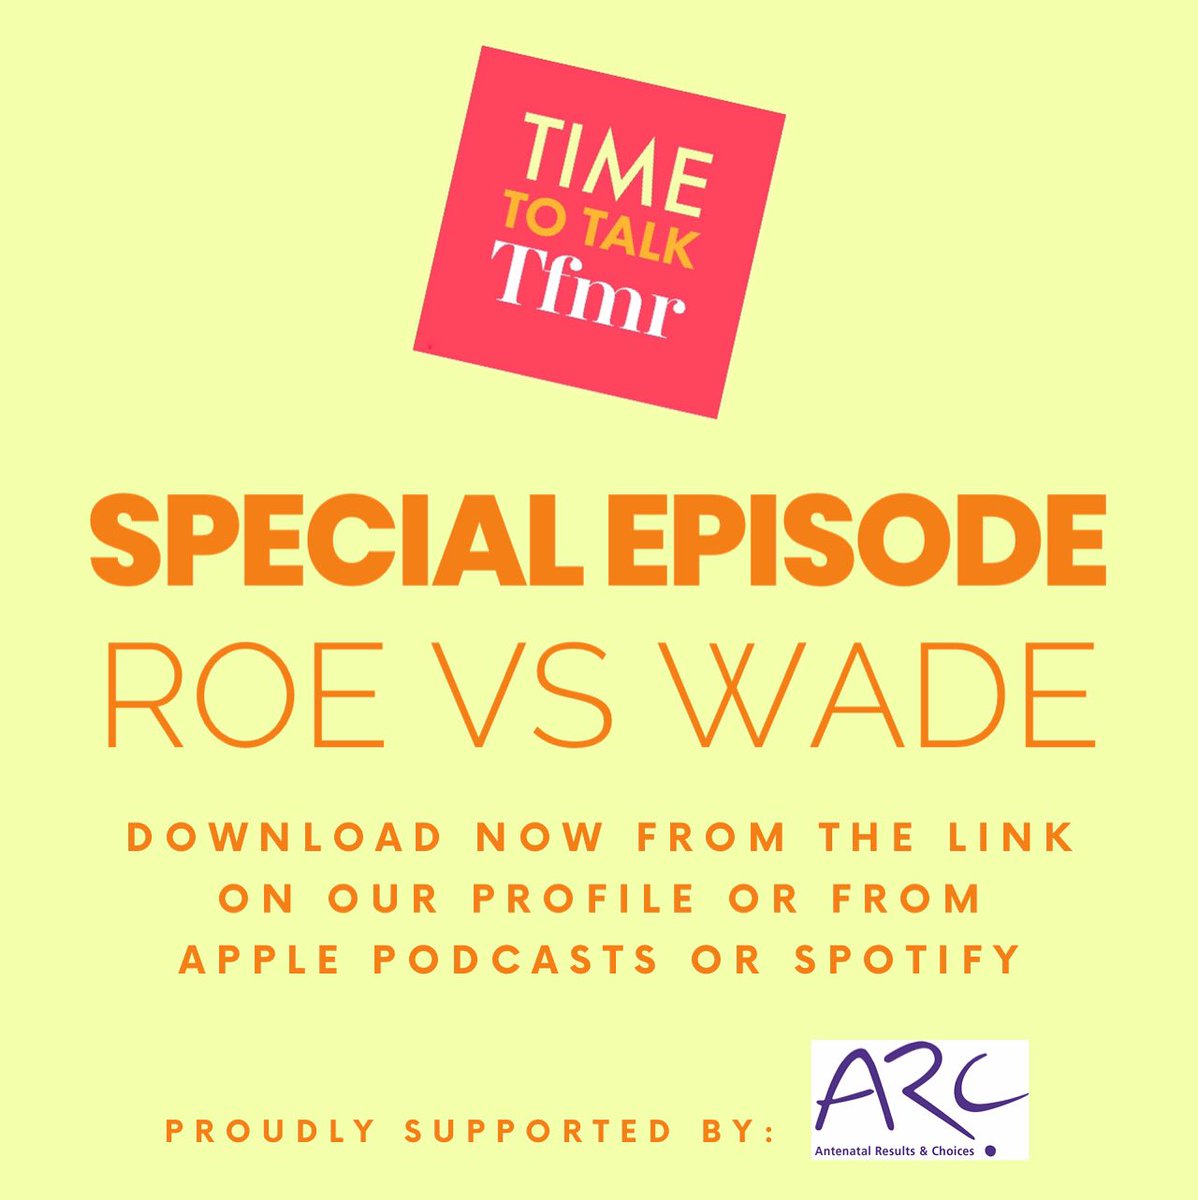 💥 S P E C I A L E P I S O D E 💥 We discuss the #RoeVsWade decision. What this means for #WomensRights #ReproductiveRights & for #TFMR parents everywhere & what we can do about it. Link here: podcasts.apple.com/gb/podcast/tim… Or search #TimeToTalkTFMR wherever you get your pods from.